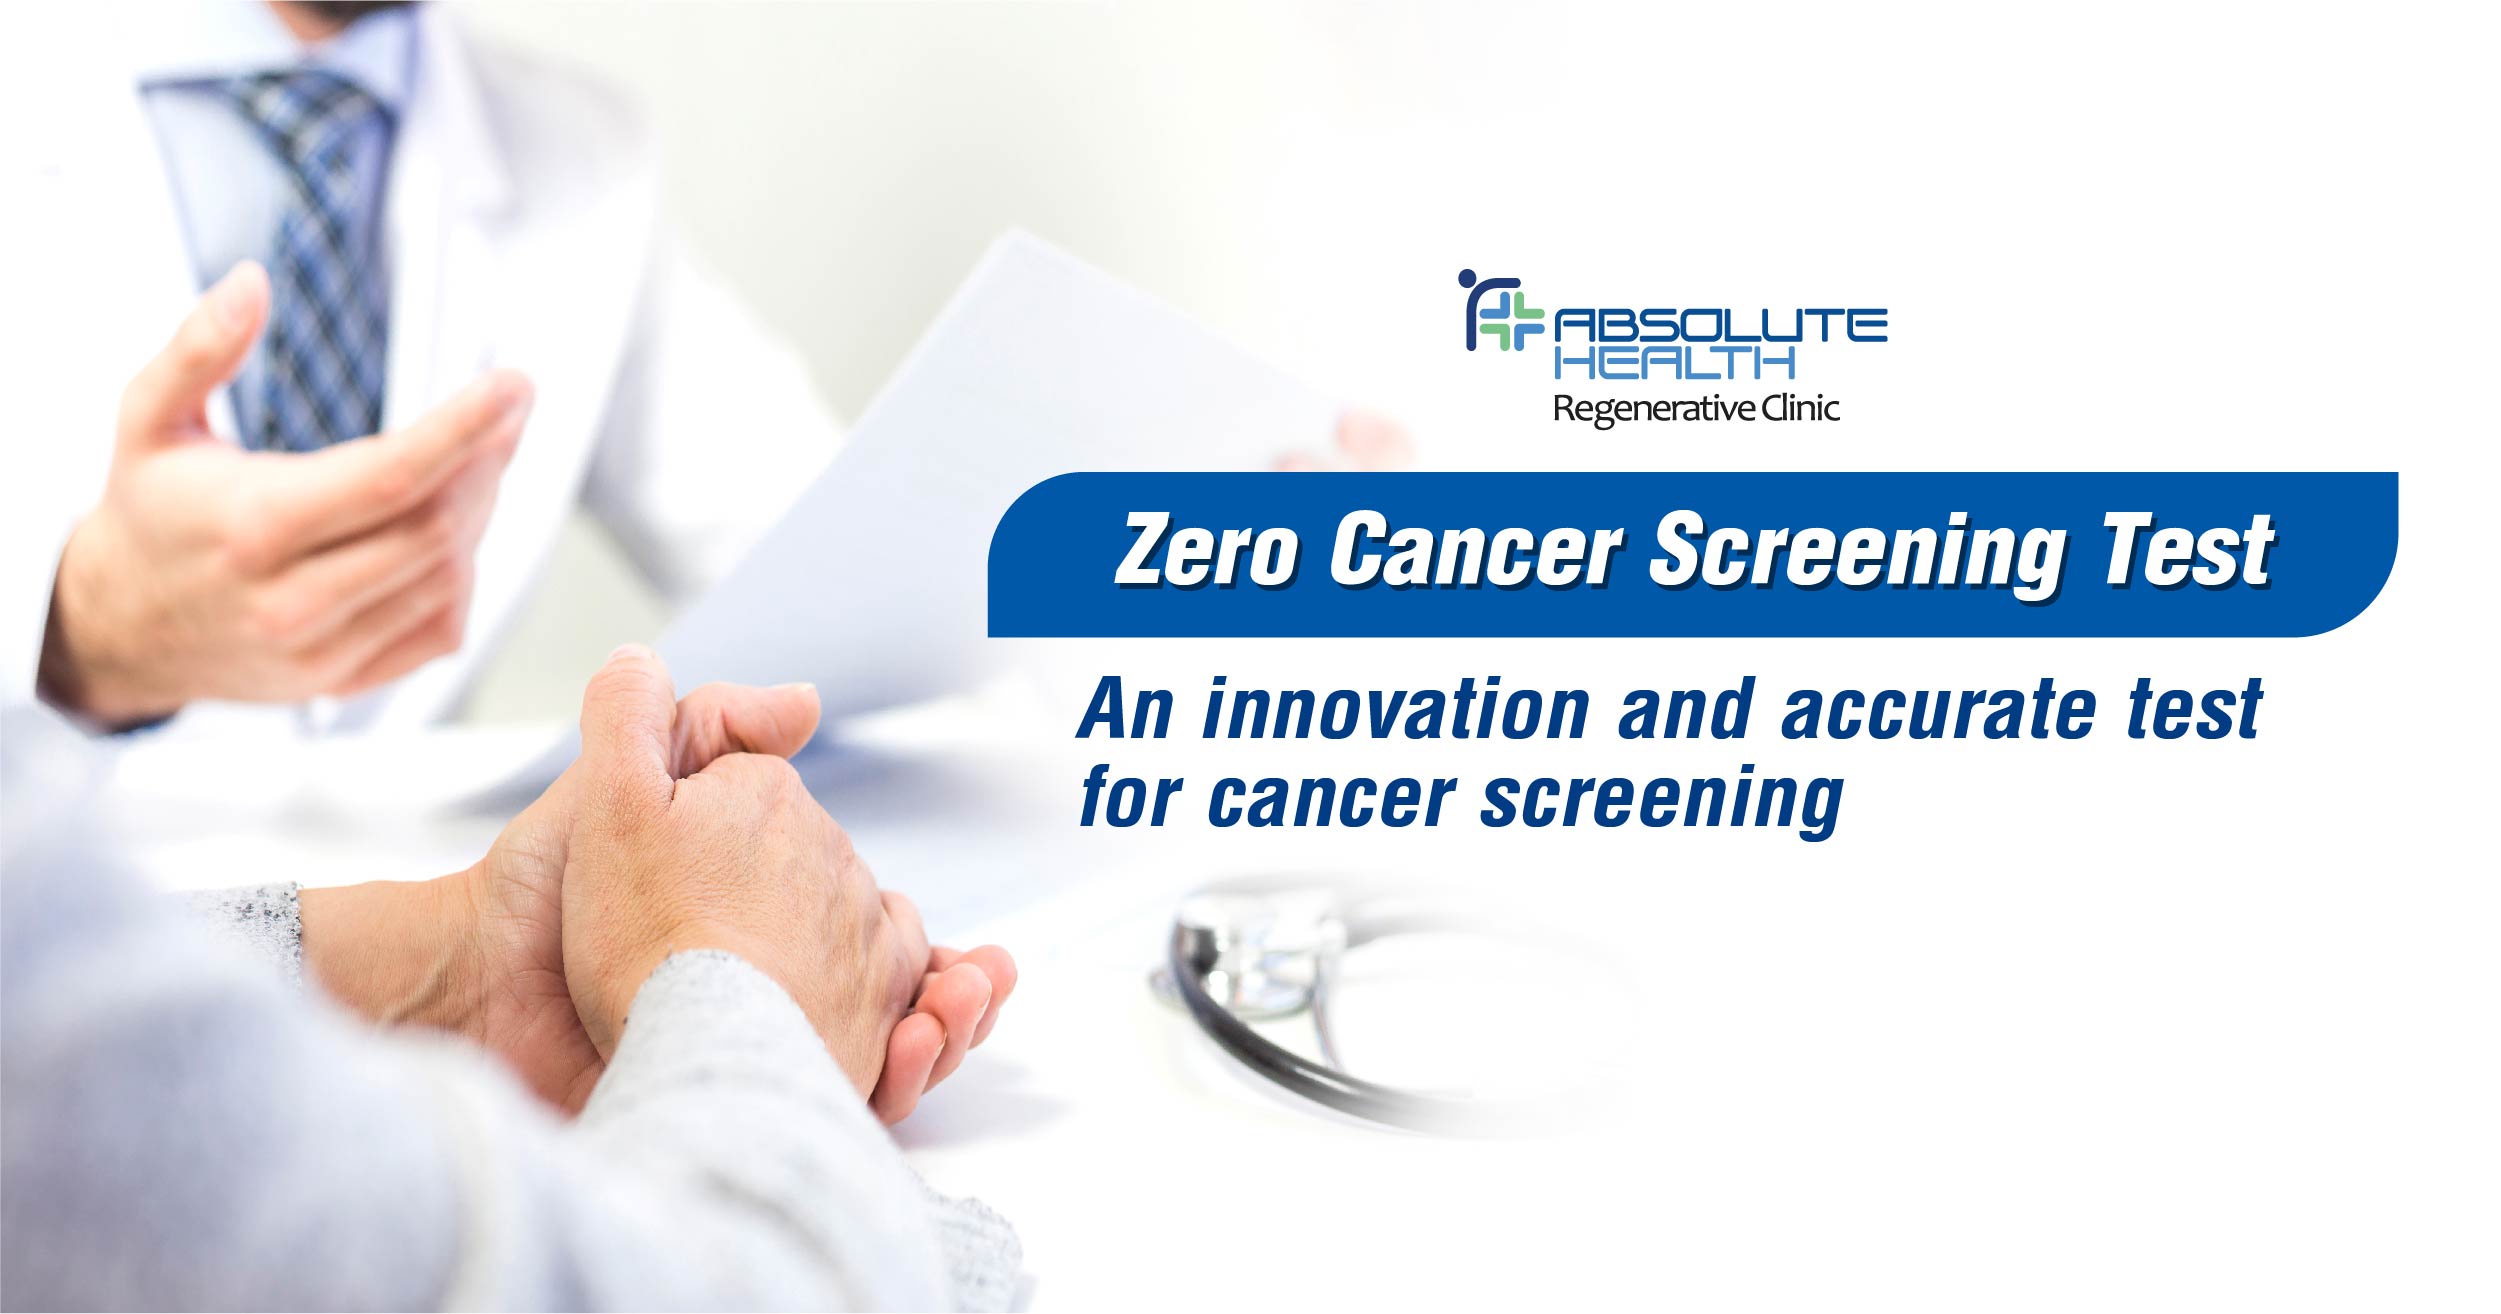 Zero Cancer Screening Test – An innovative and accurate test for cancer screening 